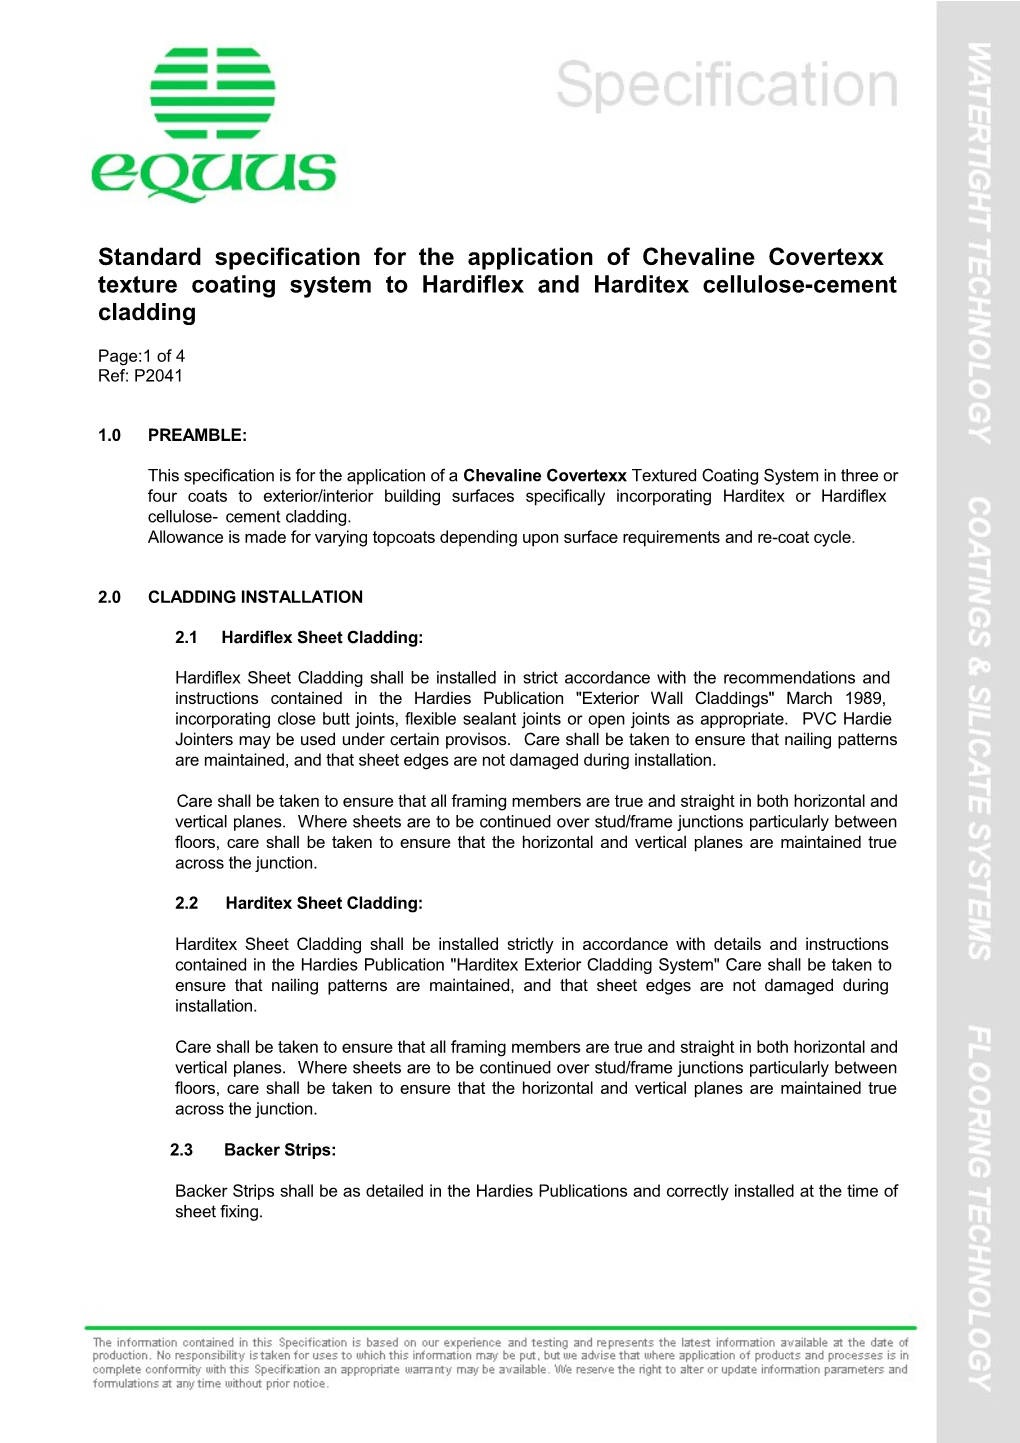 Standard Specification for the Application of Chevaline Covertexx Texture Coating System